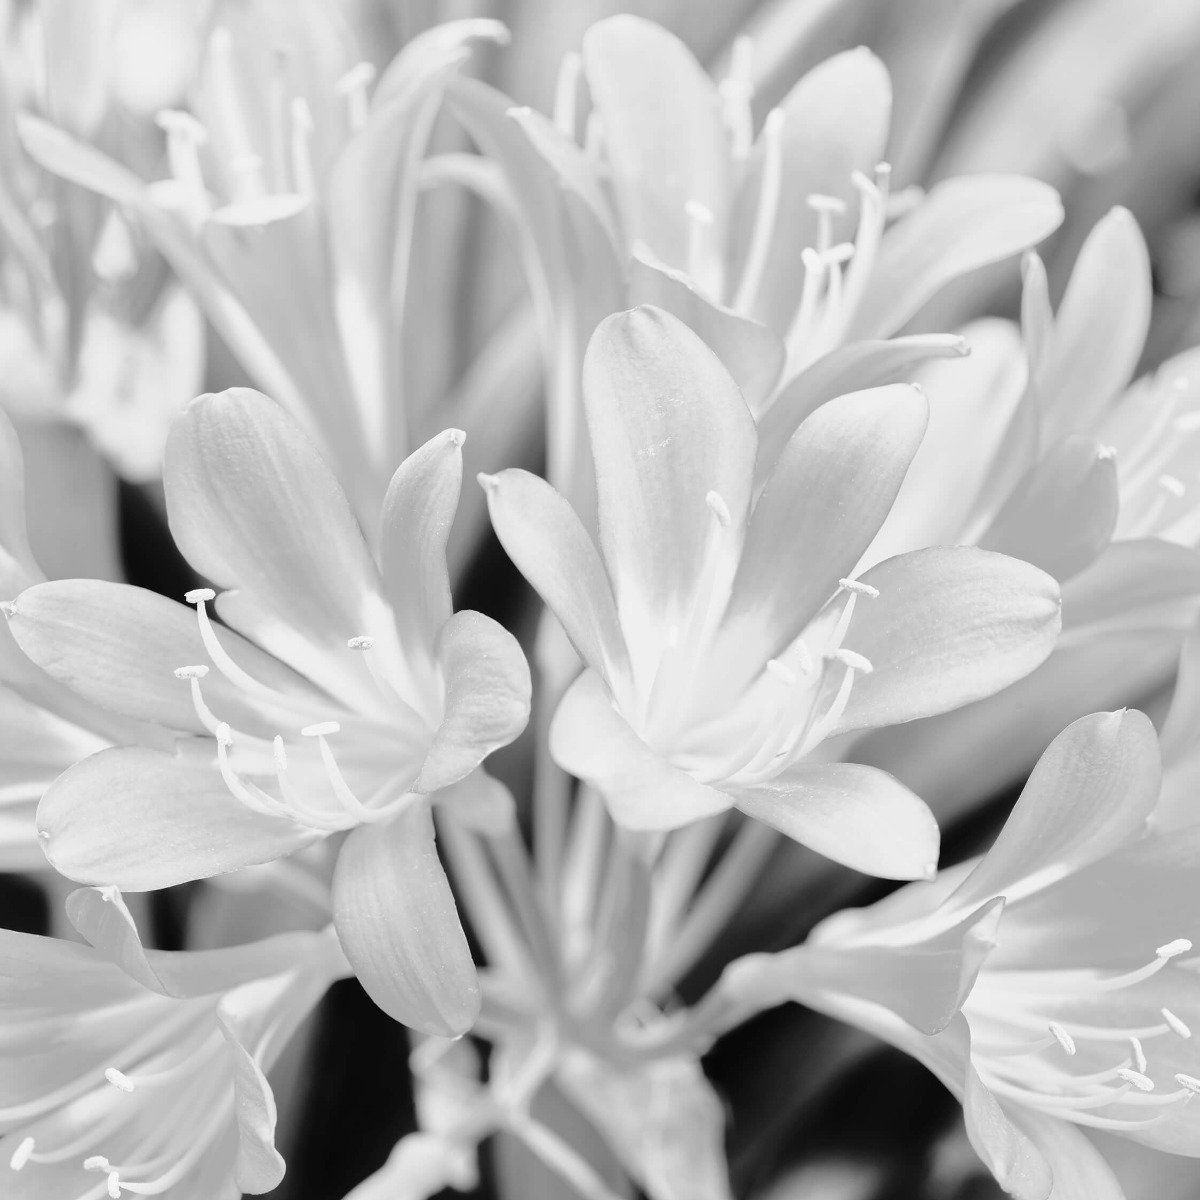 Flowers in bloom, black and white